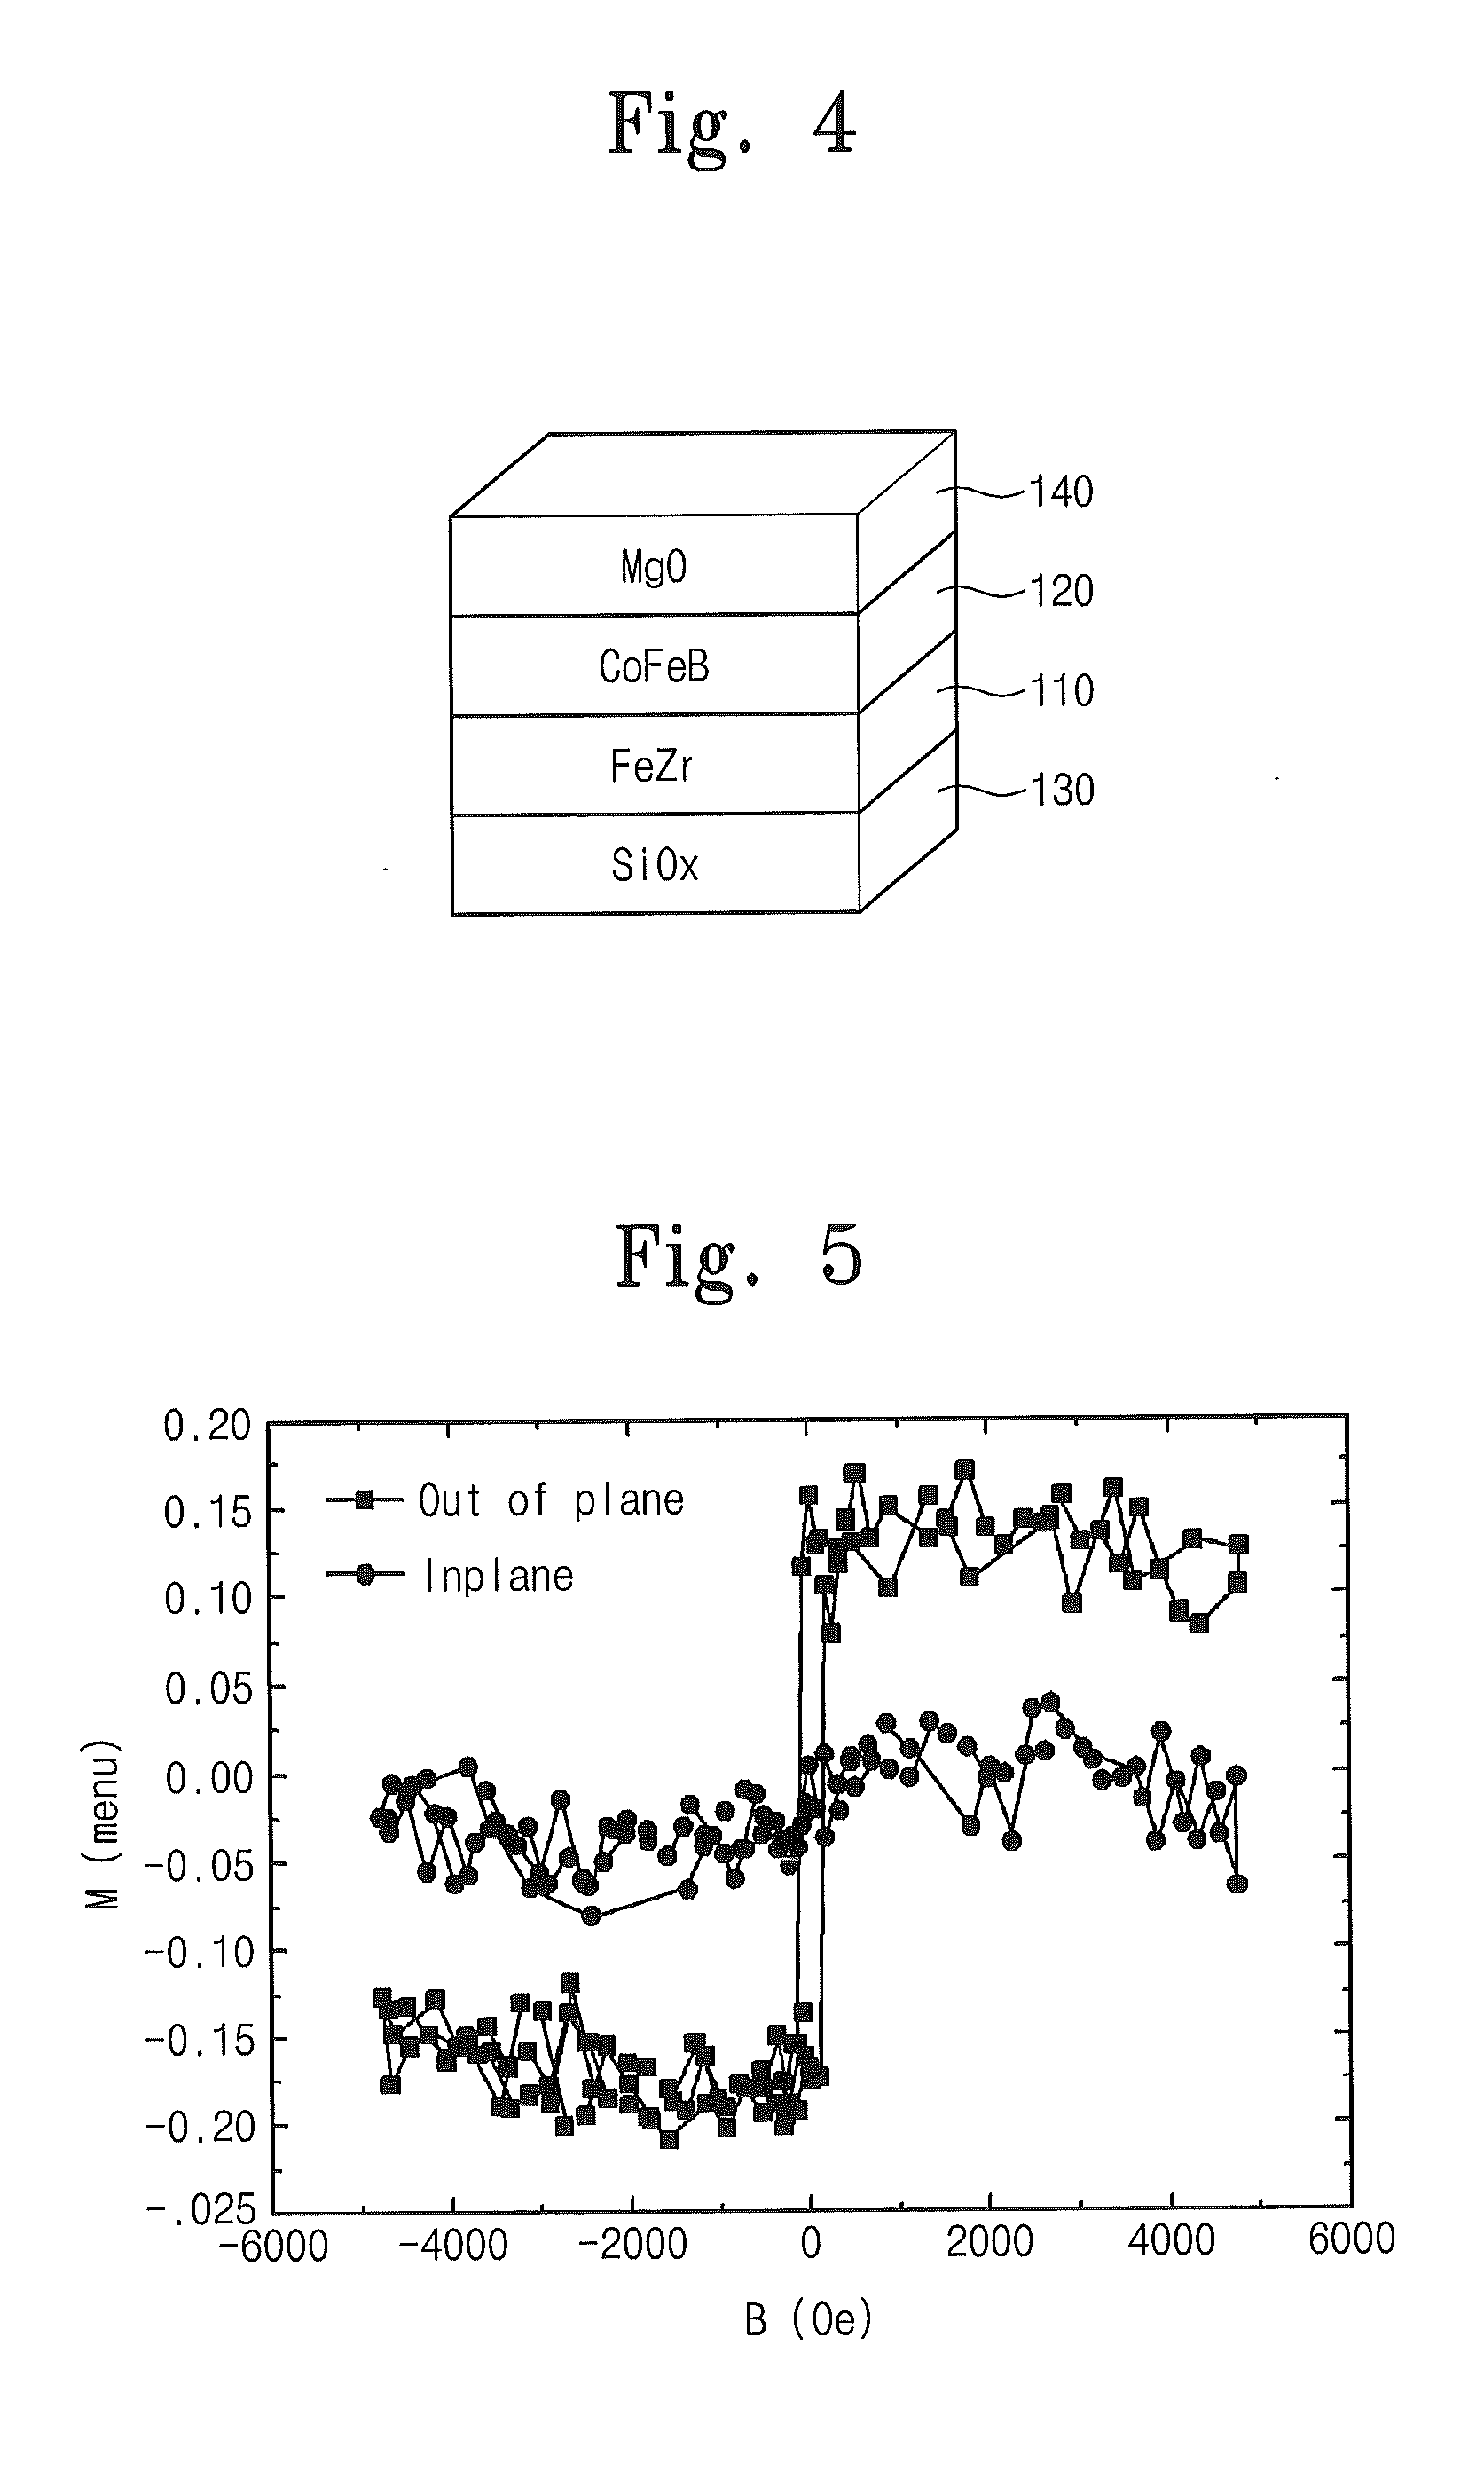 Magnetic Tunnel Junction Device Having Amorphous Buffer Layers That Are Magnetically Connected Together And That Have Perpendicular Magnetic Anisotropy